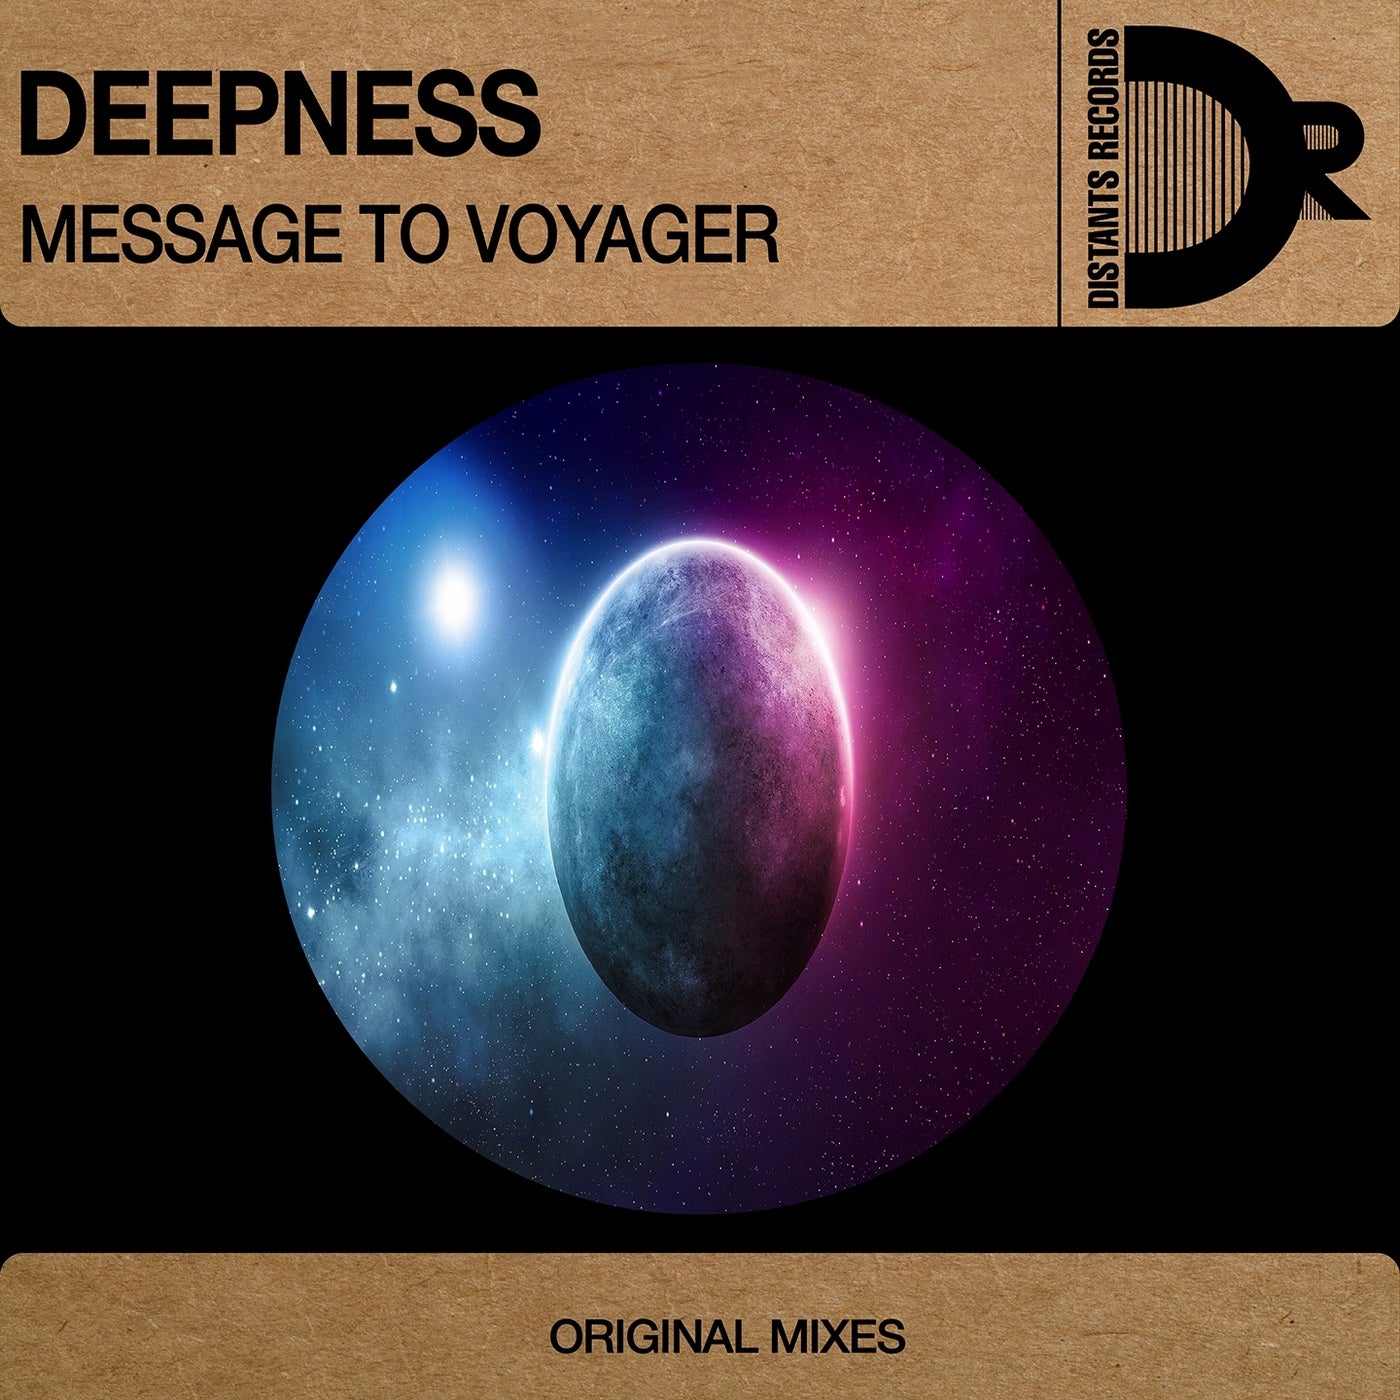 Deepness - Message the voyager [DIS037]